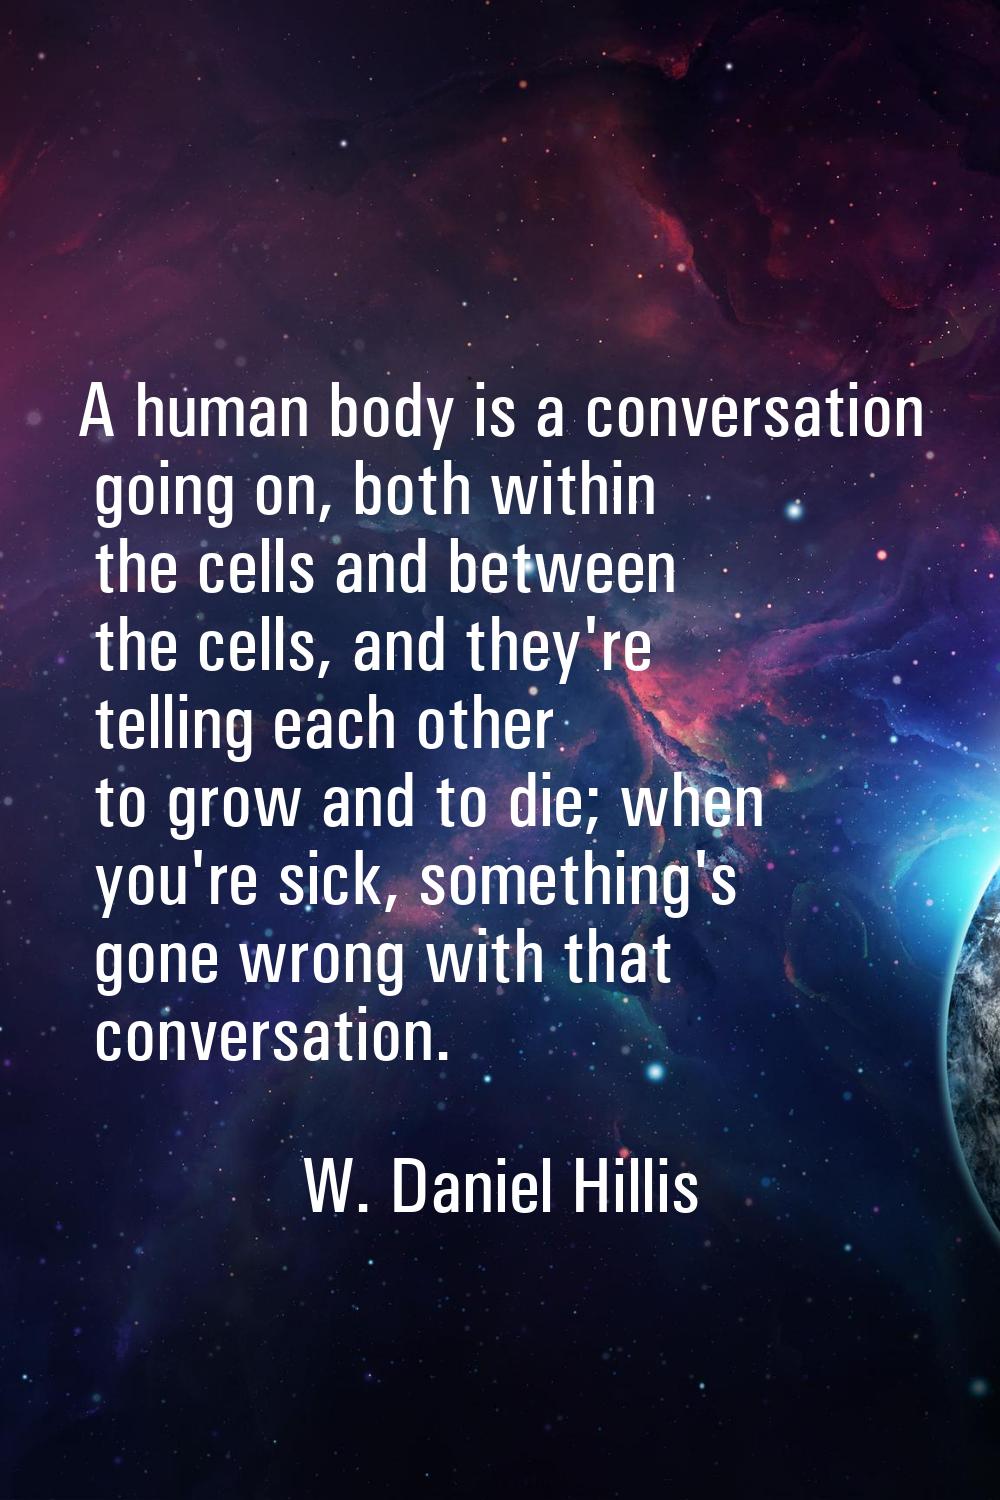 A human body is a conversation going on, both within the cells and between the cells, and they're t